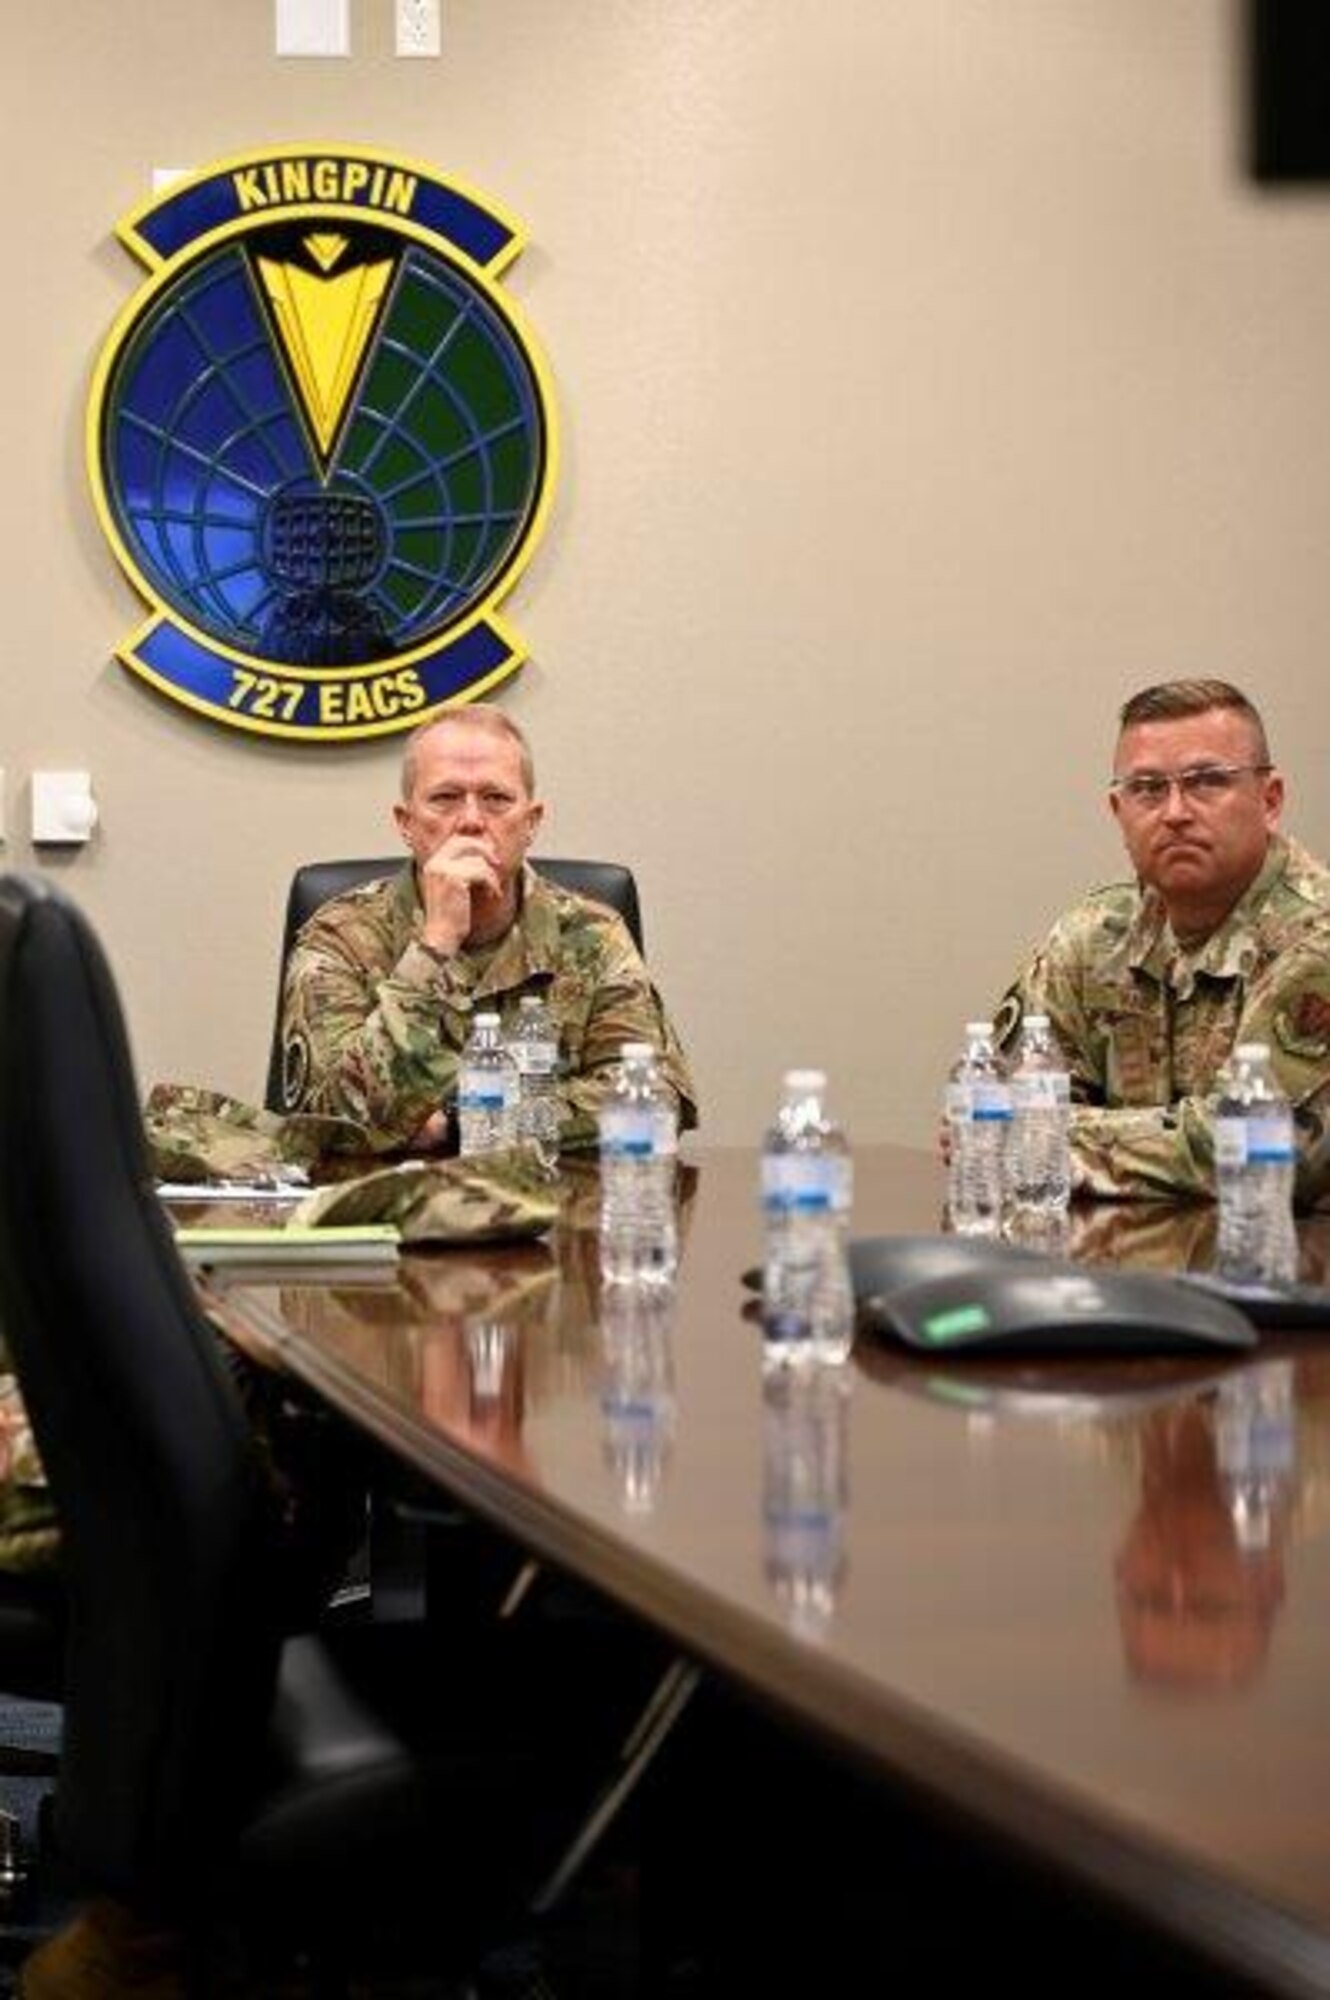 U.S. Air Force Gen. Mark Kelly (left), commander of Air Combat Command, and Chief Master Sgt. David Wade (right), Command Chief of Air Combat Command, listens to a brief from the 727th Expeditionary Air Control Squadron “Kingpin” during a base tour at Shaw Air Force Base, South Carolina, June 25, 2021. Shaw Air Force Base leadership, to include 9th Air Force (AFCENT) commander, Lt. Gen. Greg Guillot, hosted Gen. Mark Kelly on base Friday, June 26. In addition to meeting with Airmen, the generals discussed future plans at Shaw, to include building resiliency of 9th Air Force (AFCENT). The first of these plans was realized this past spring with the current repositioning of the Kingpin mission –and the more than 150 Airmen and coalition partners who support it –from the Middle East to Sumter.